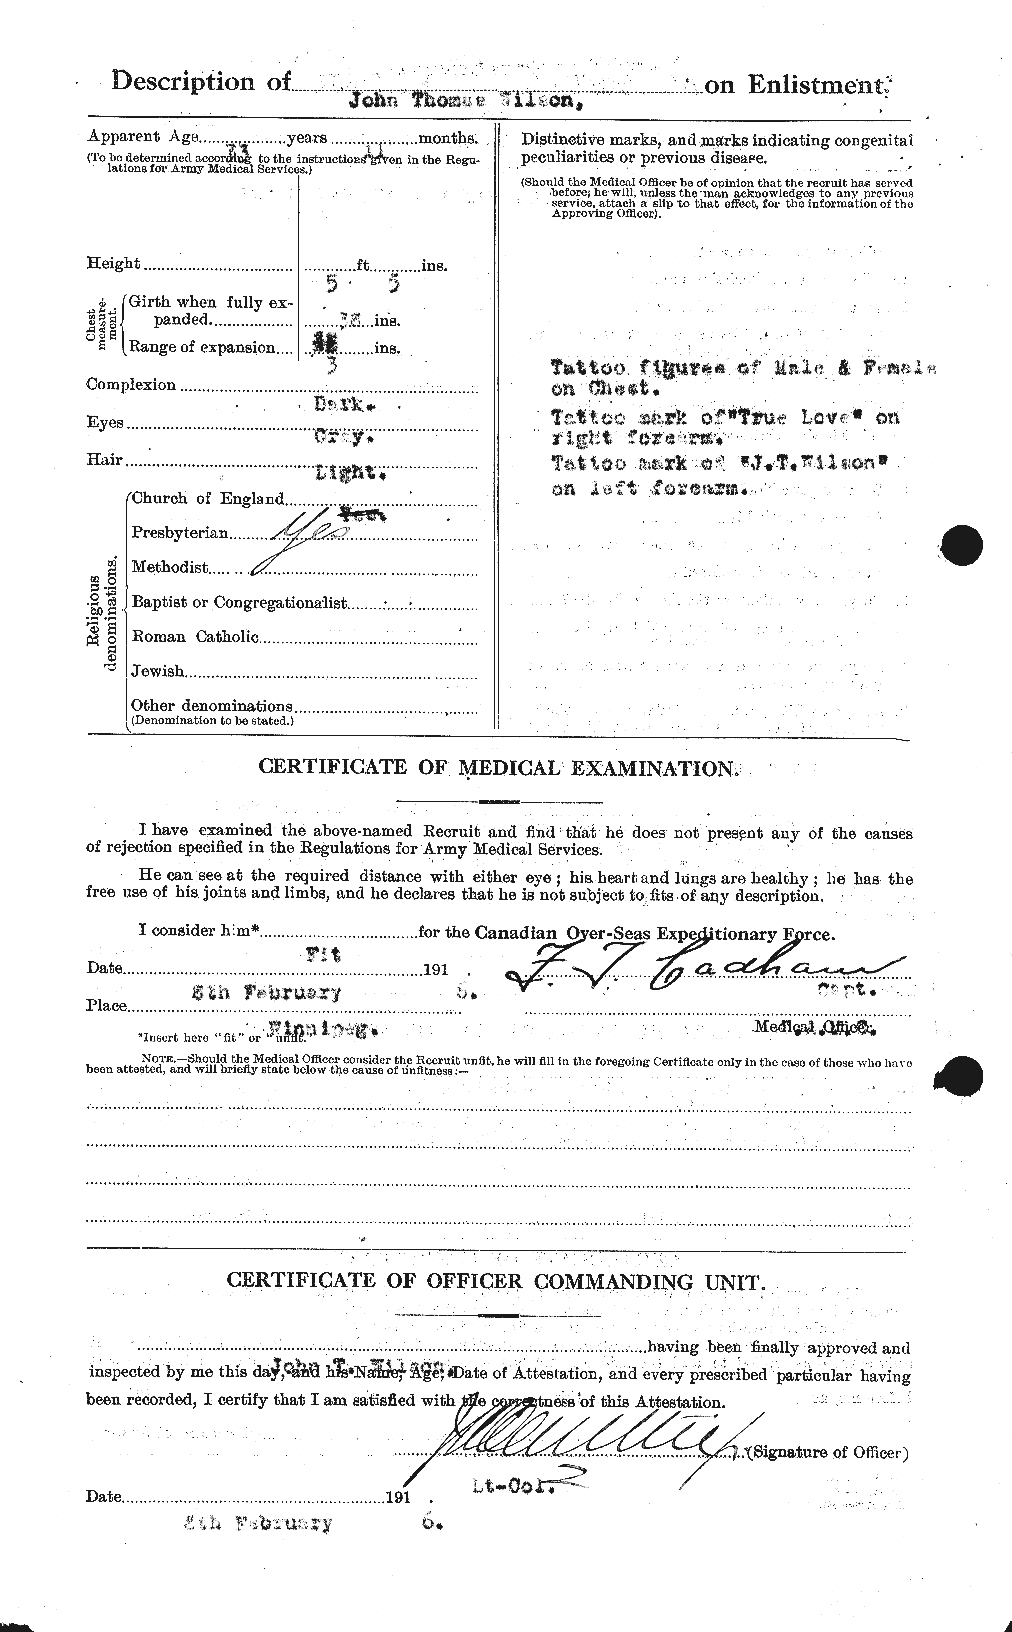 Personnel Records of the First World War - CEF 678518b